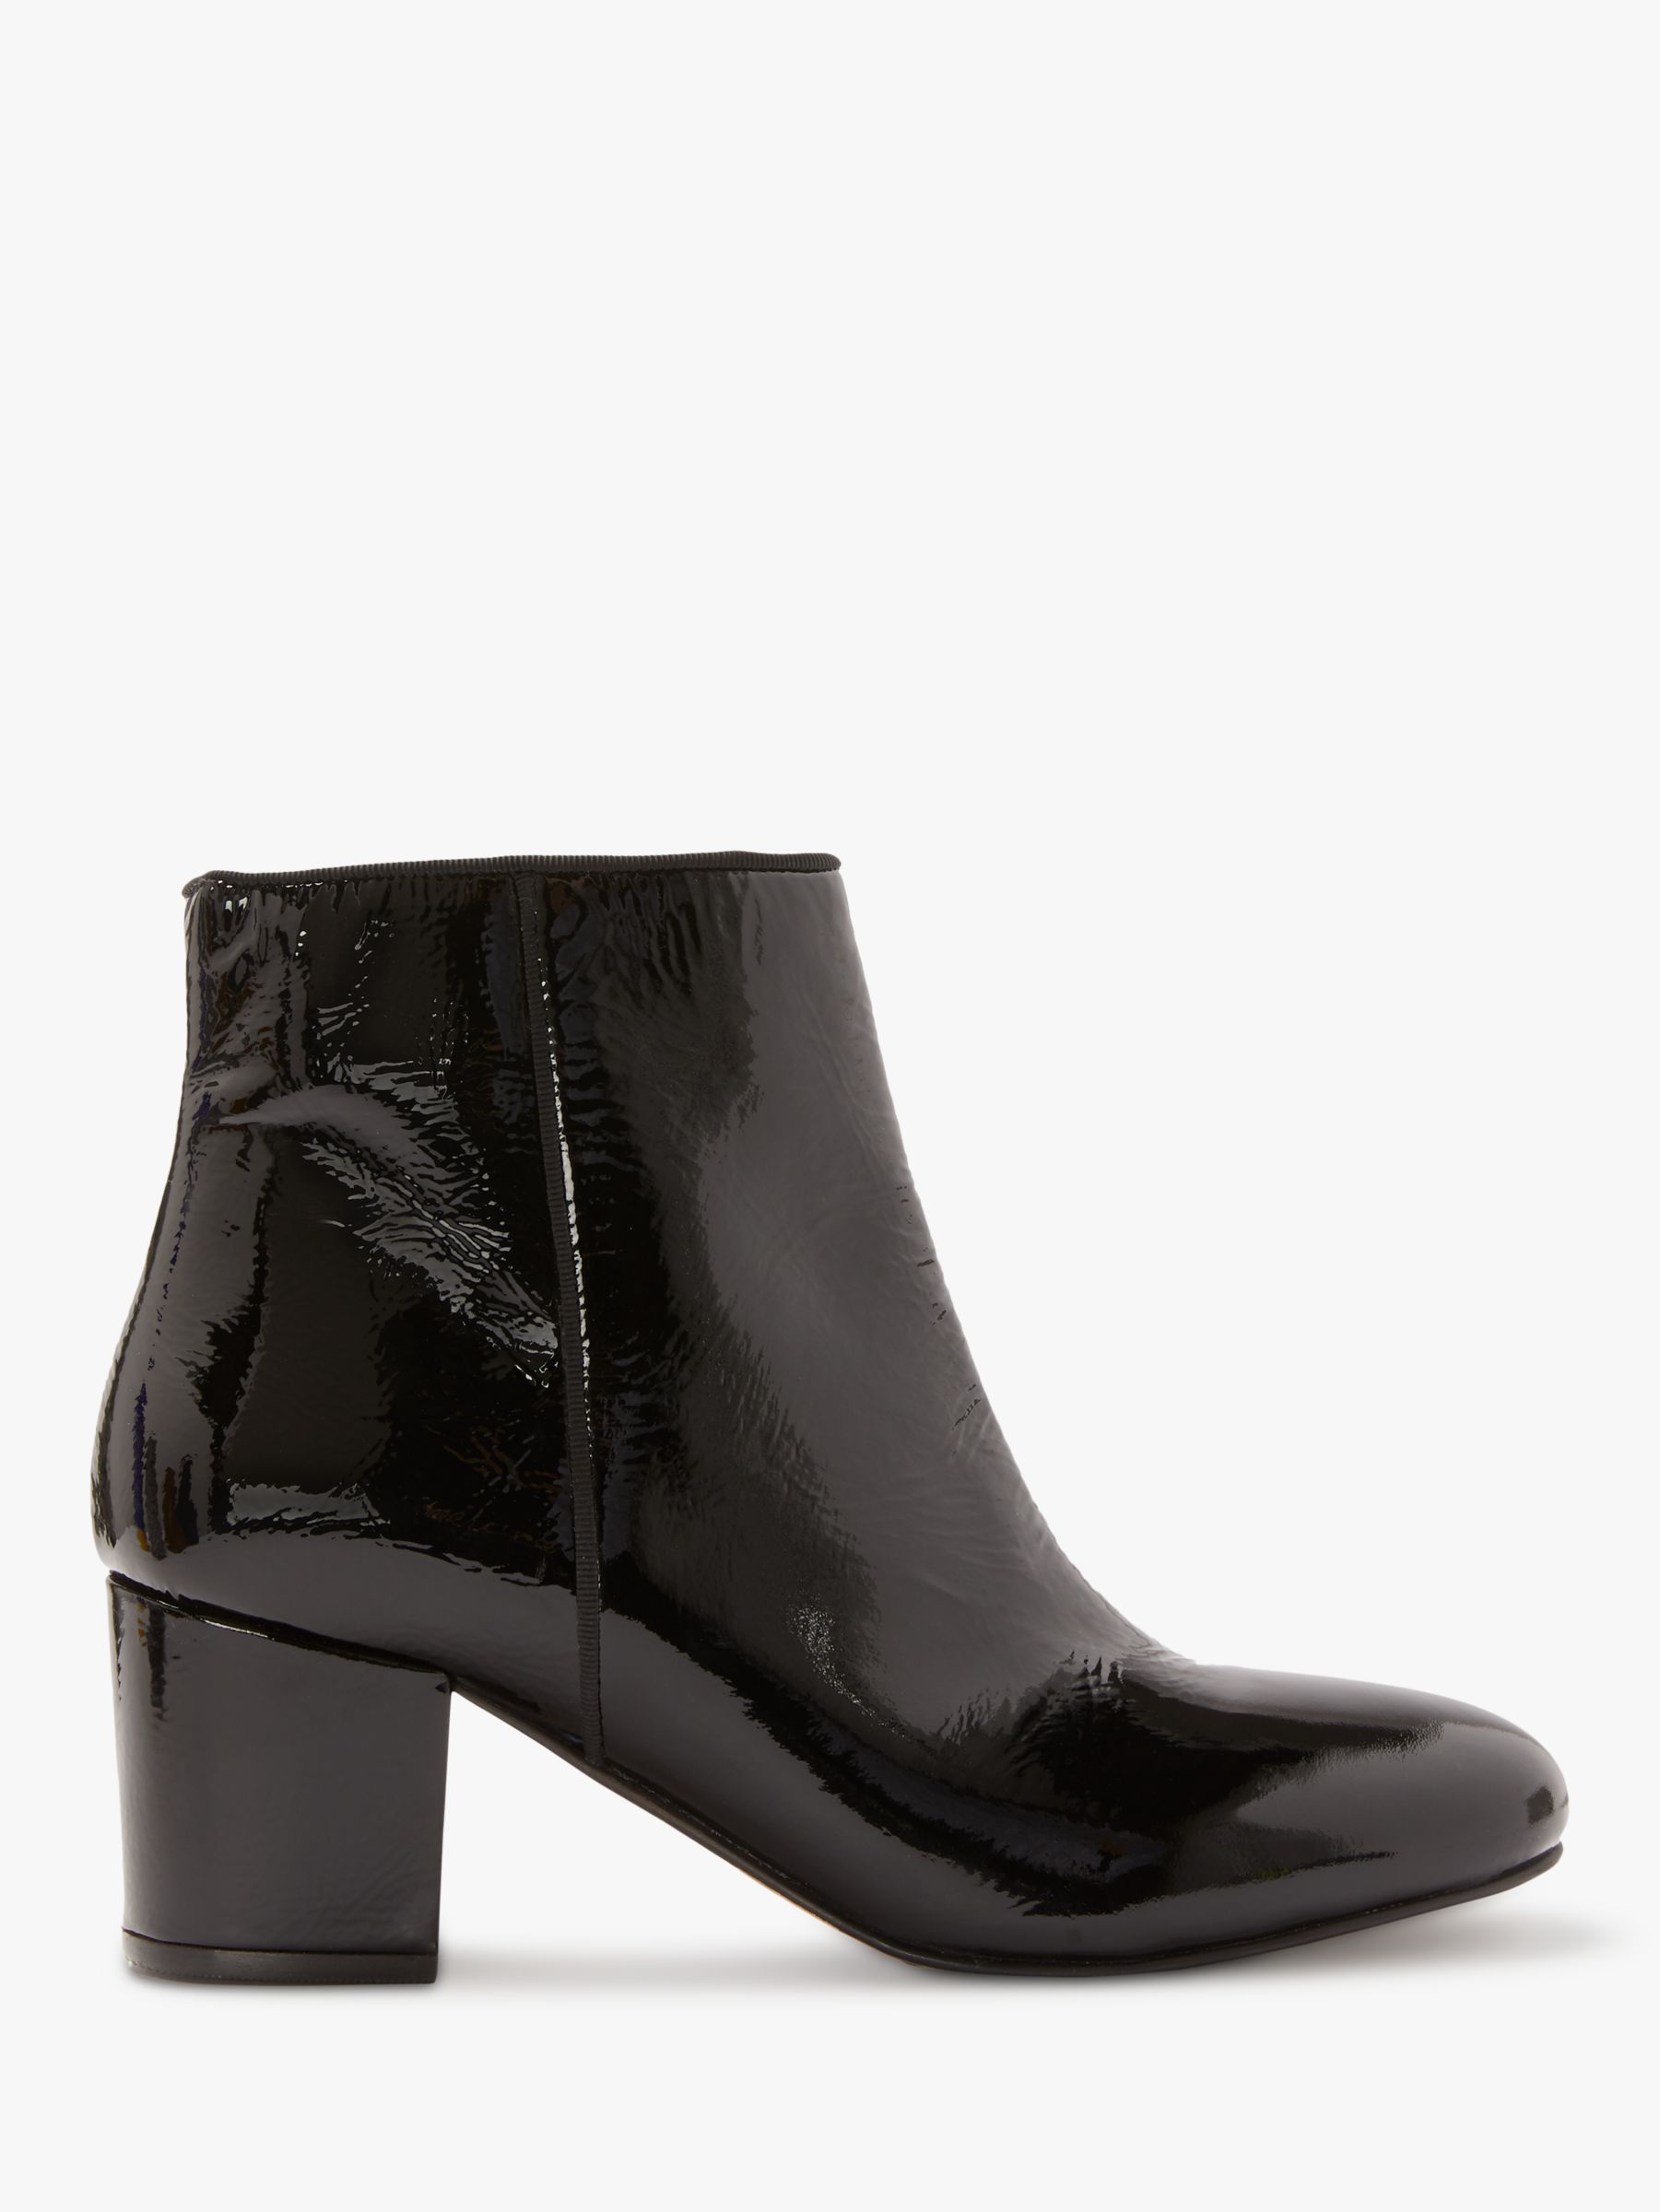 Boden Tredegar Heeled Ankle Boots at John Lewis & Partners